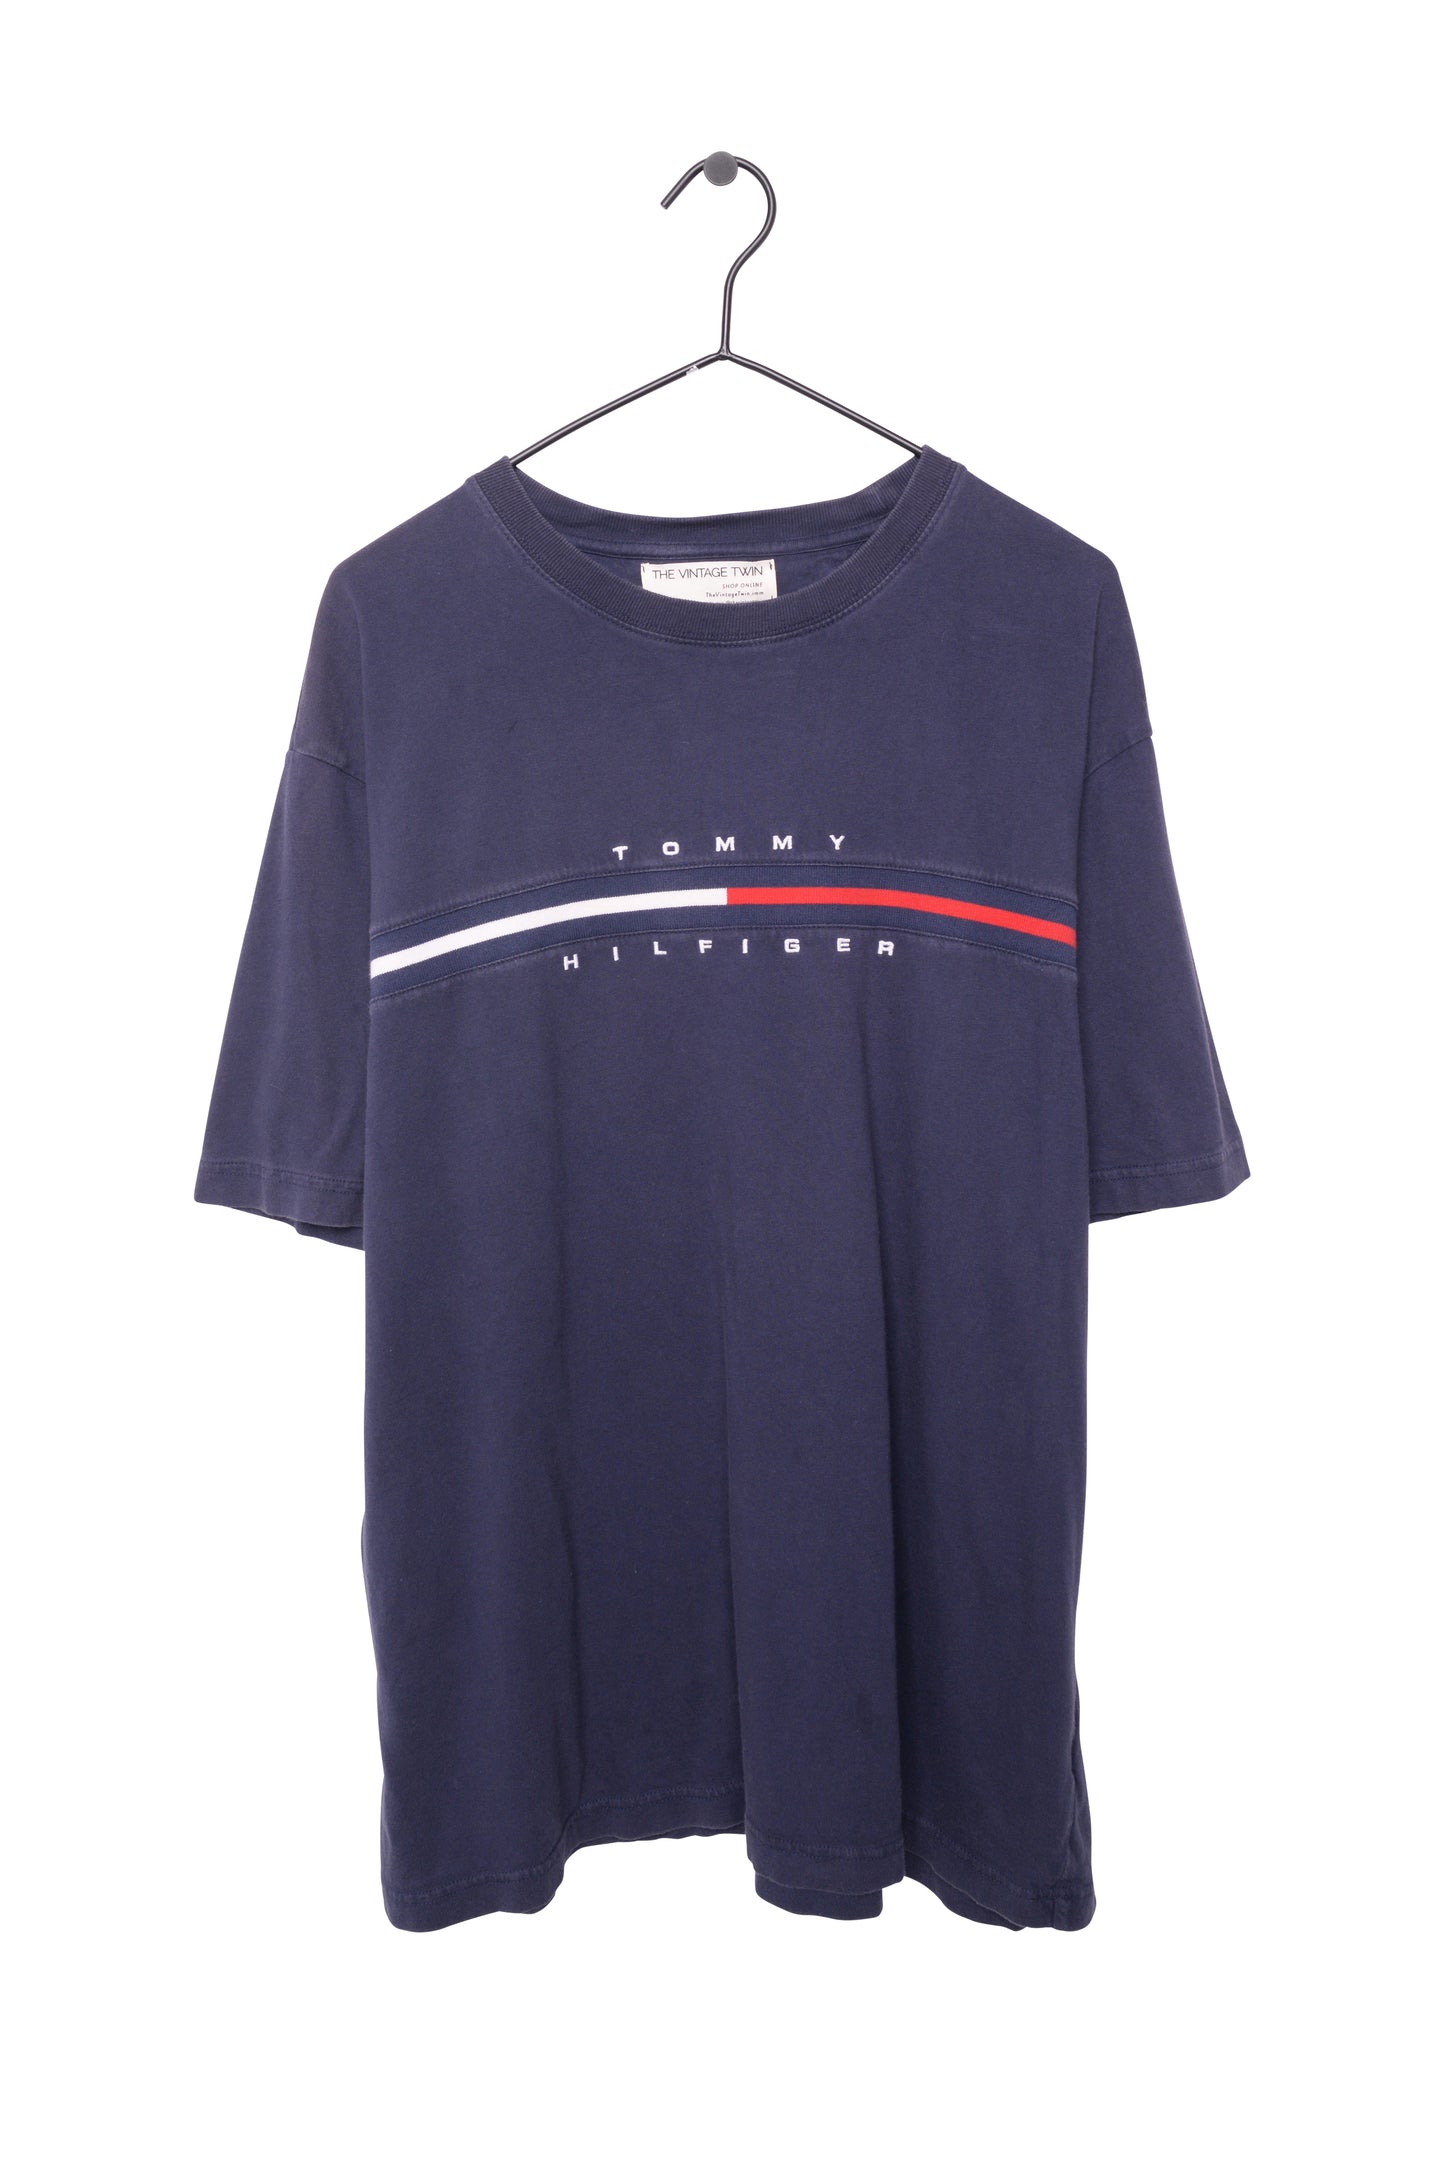 1990s Faded Tommy Hilfiger Tee